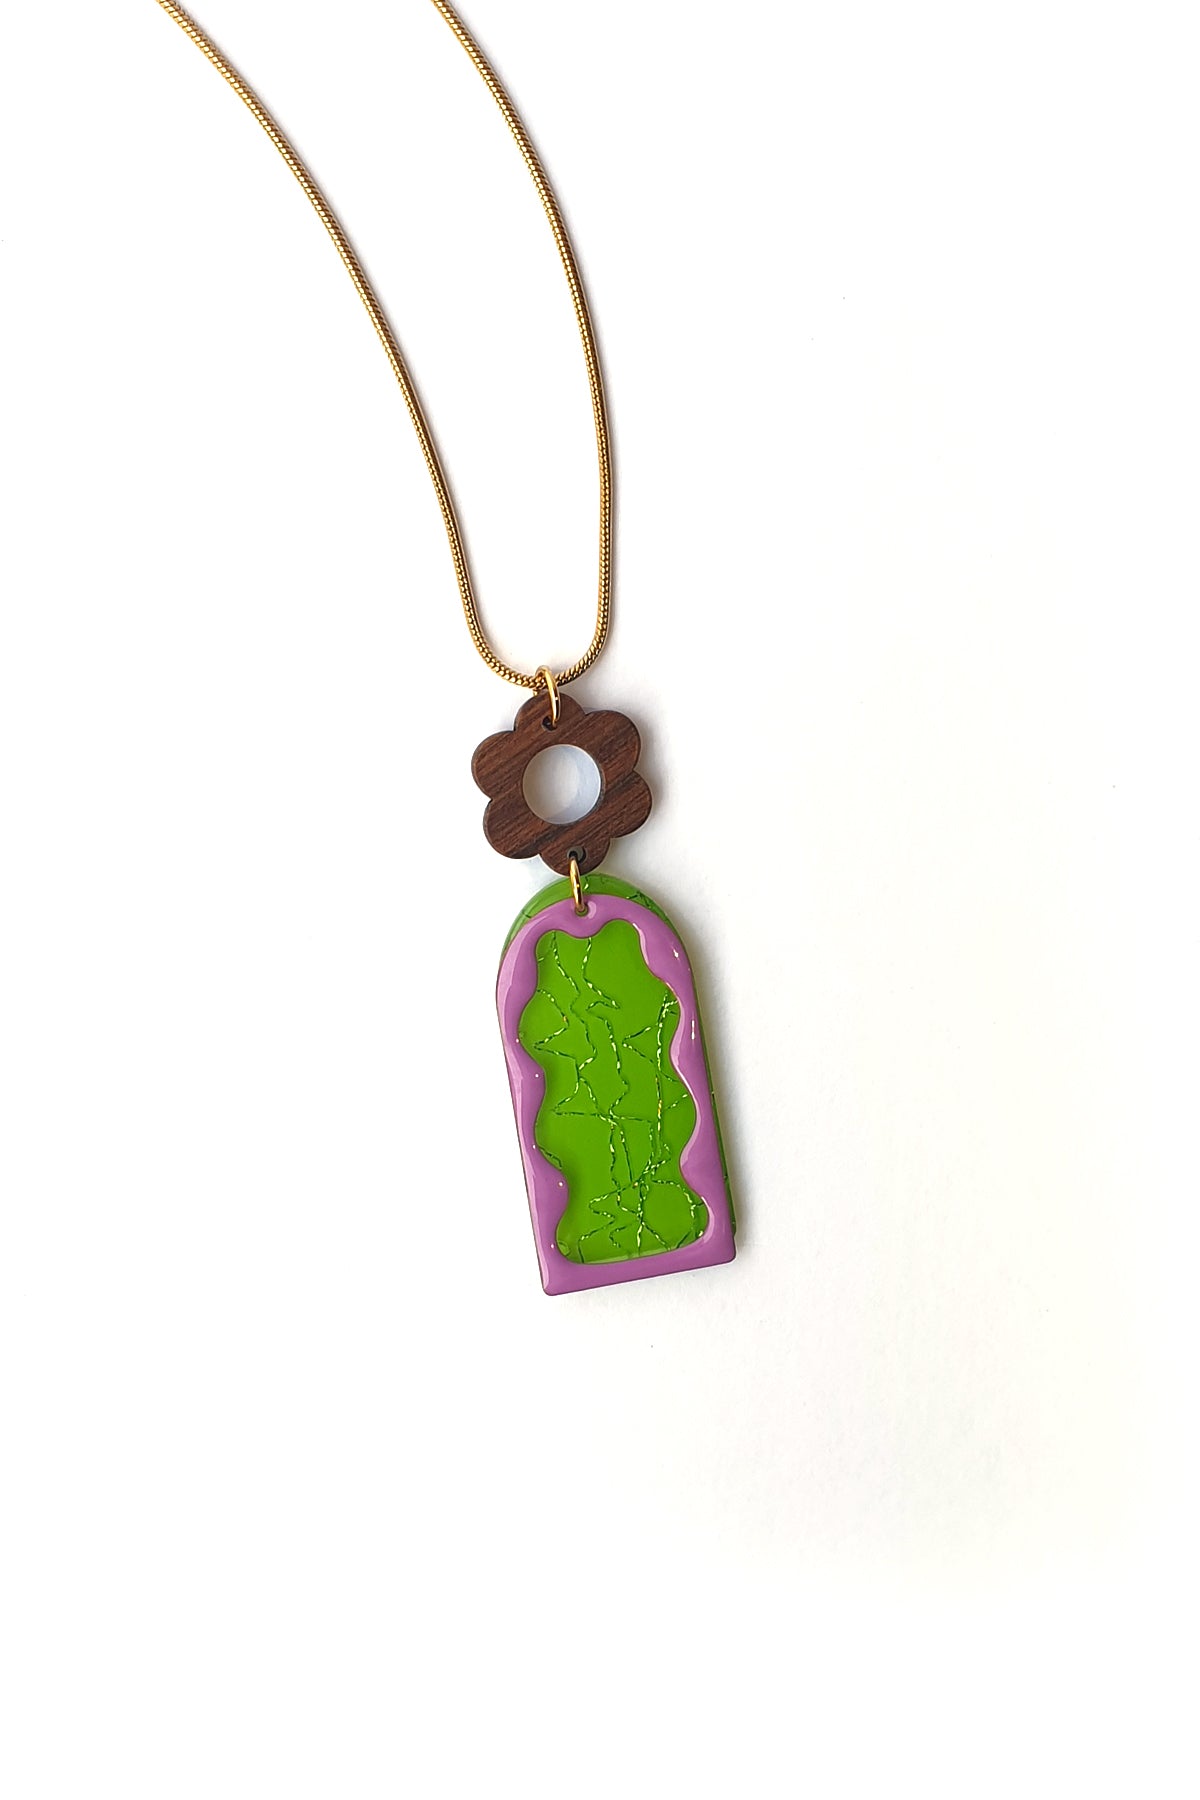 A necklace lays against a white background. It features a gold chain, a wooden flower top, followed by a green acrylic arch with silver thread detail overlaid by a purple acrylic wavy arch frame.